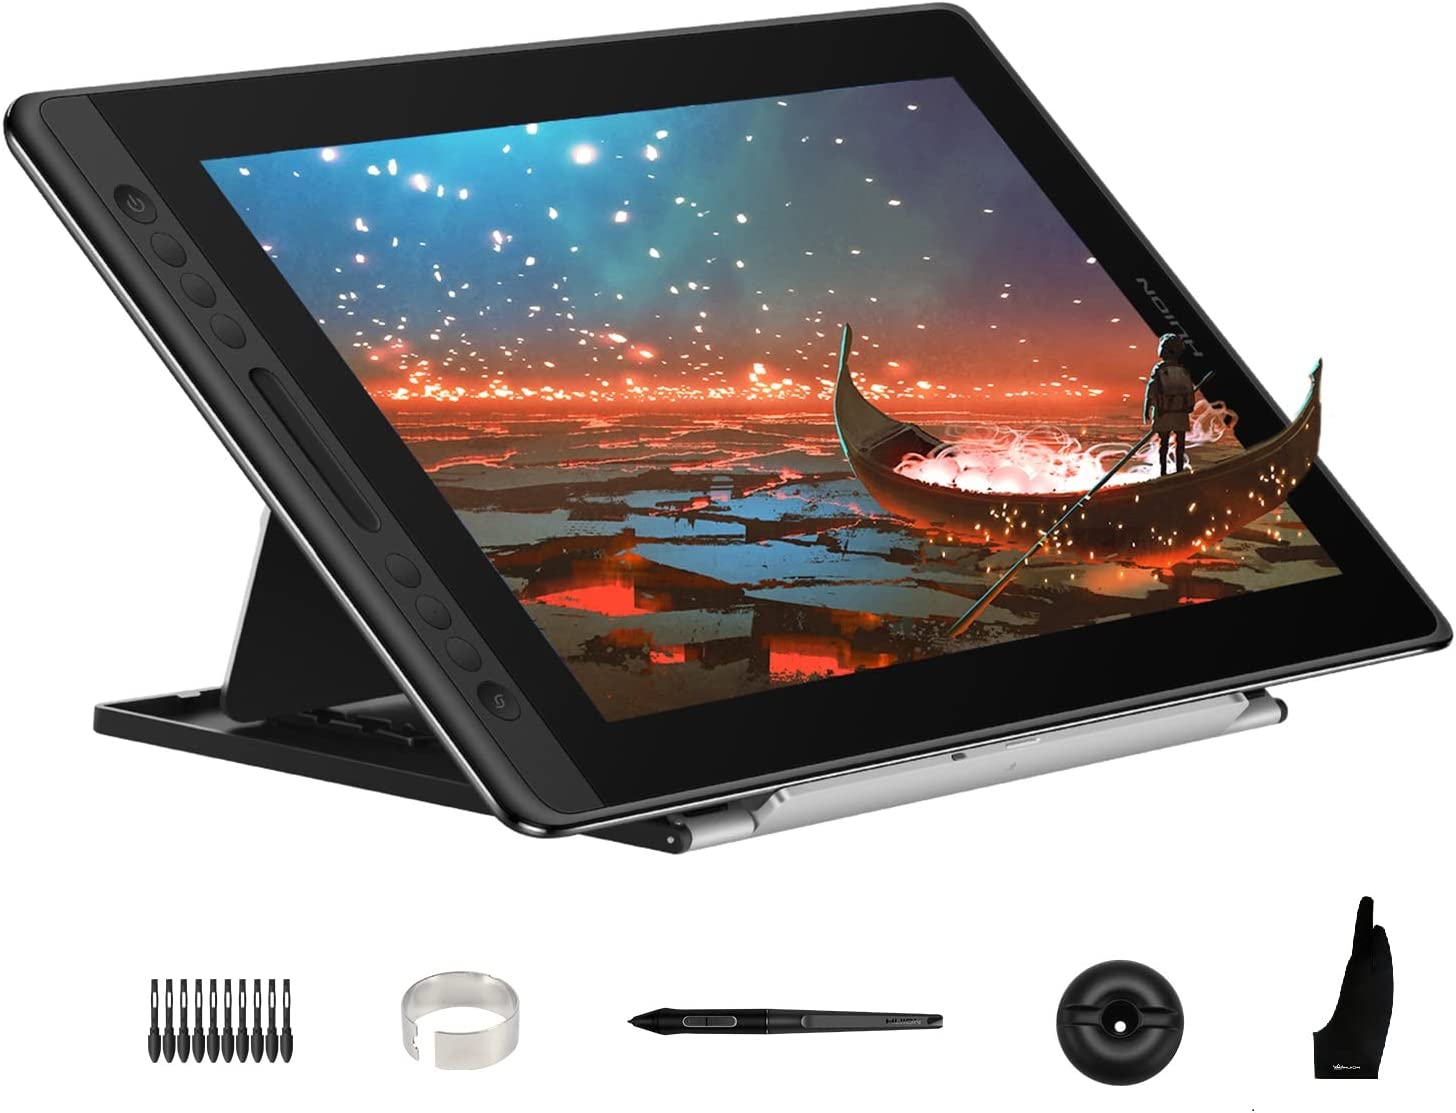 HUION KAMVAS Pro 16 Graphics Drawing Tablet with [...]